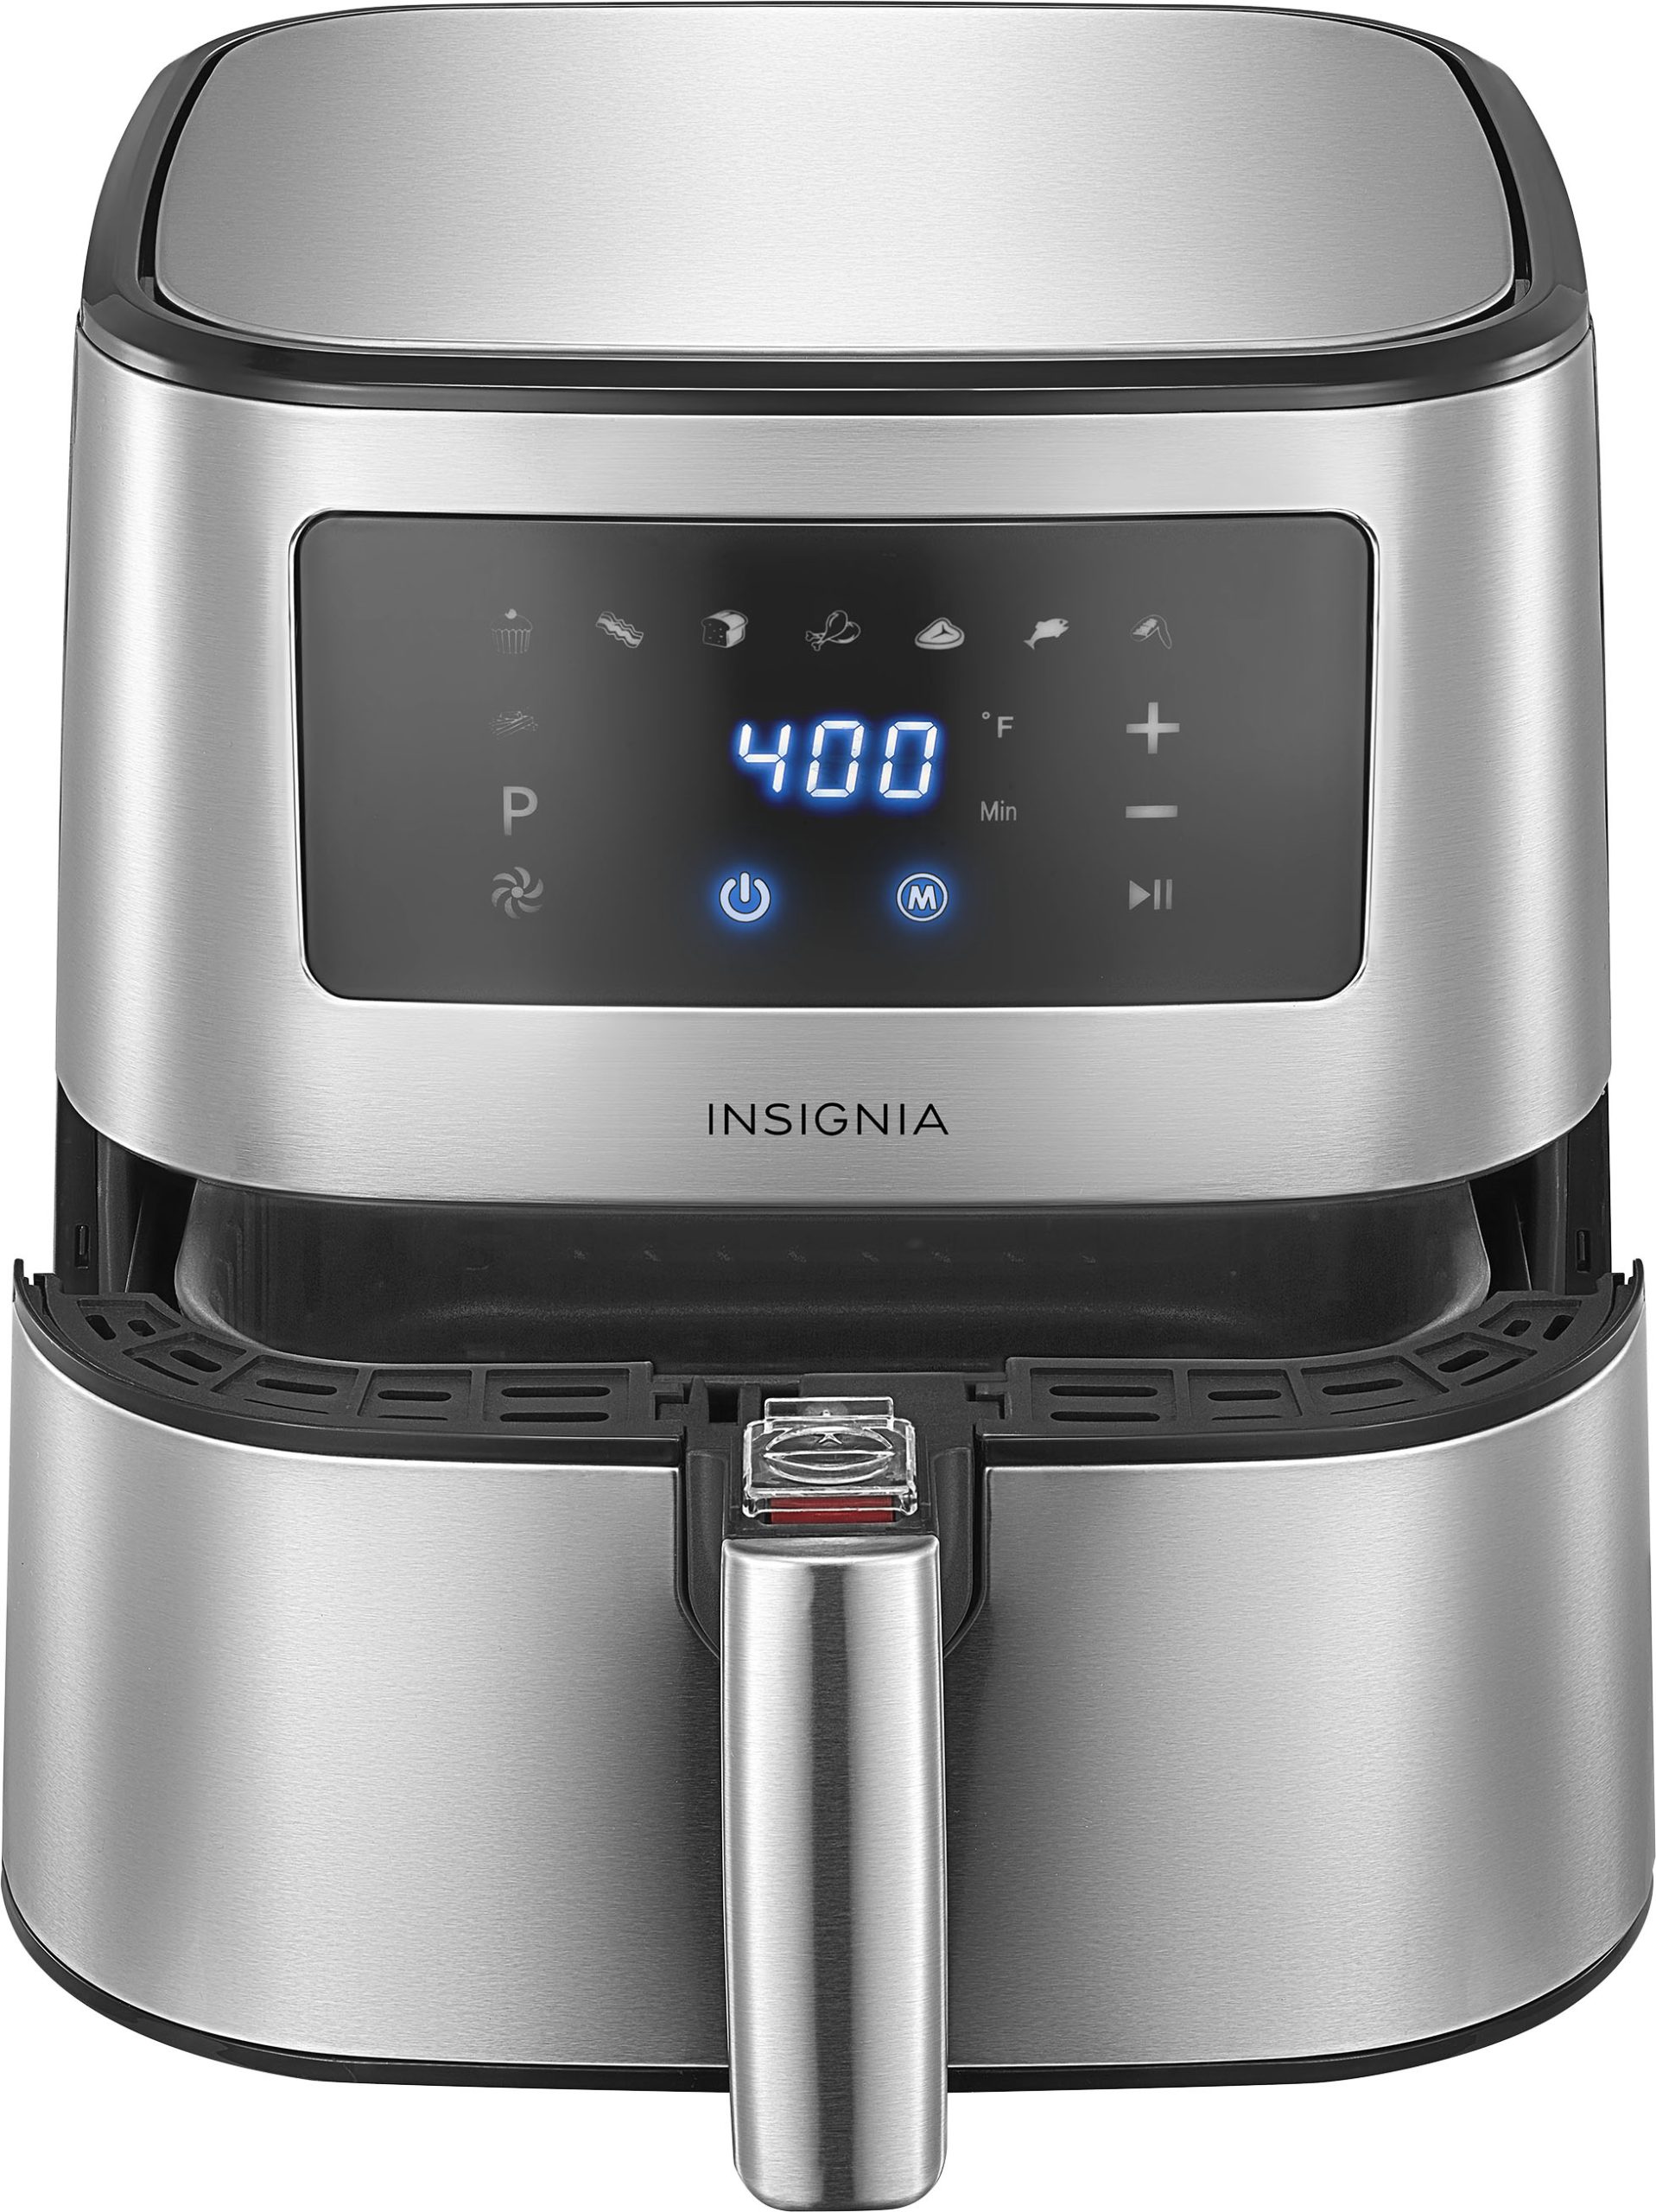 Insignia™ – 5 Qt. Digital Air Fryer – Stainless Steel – Just $59.99 at Best Buy